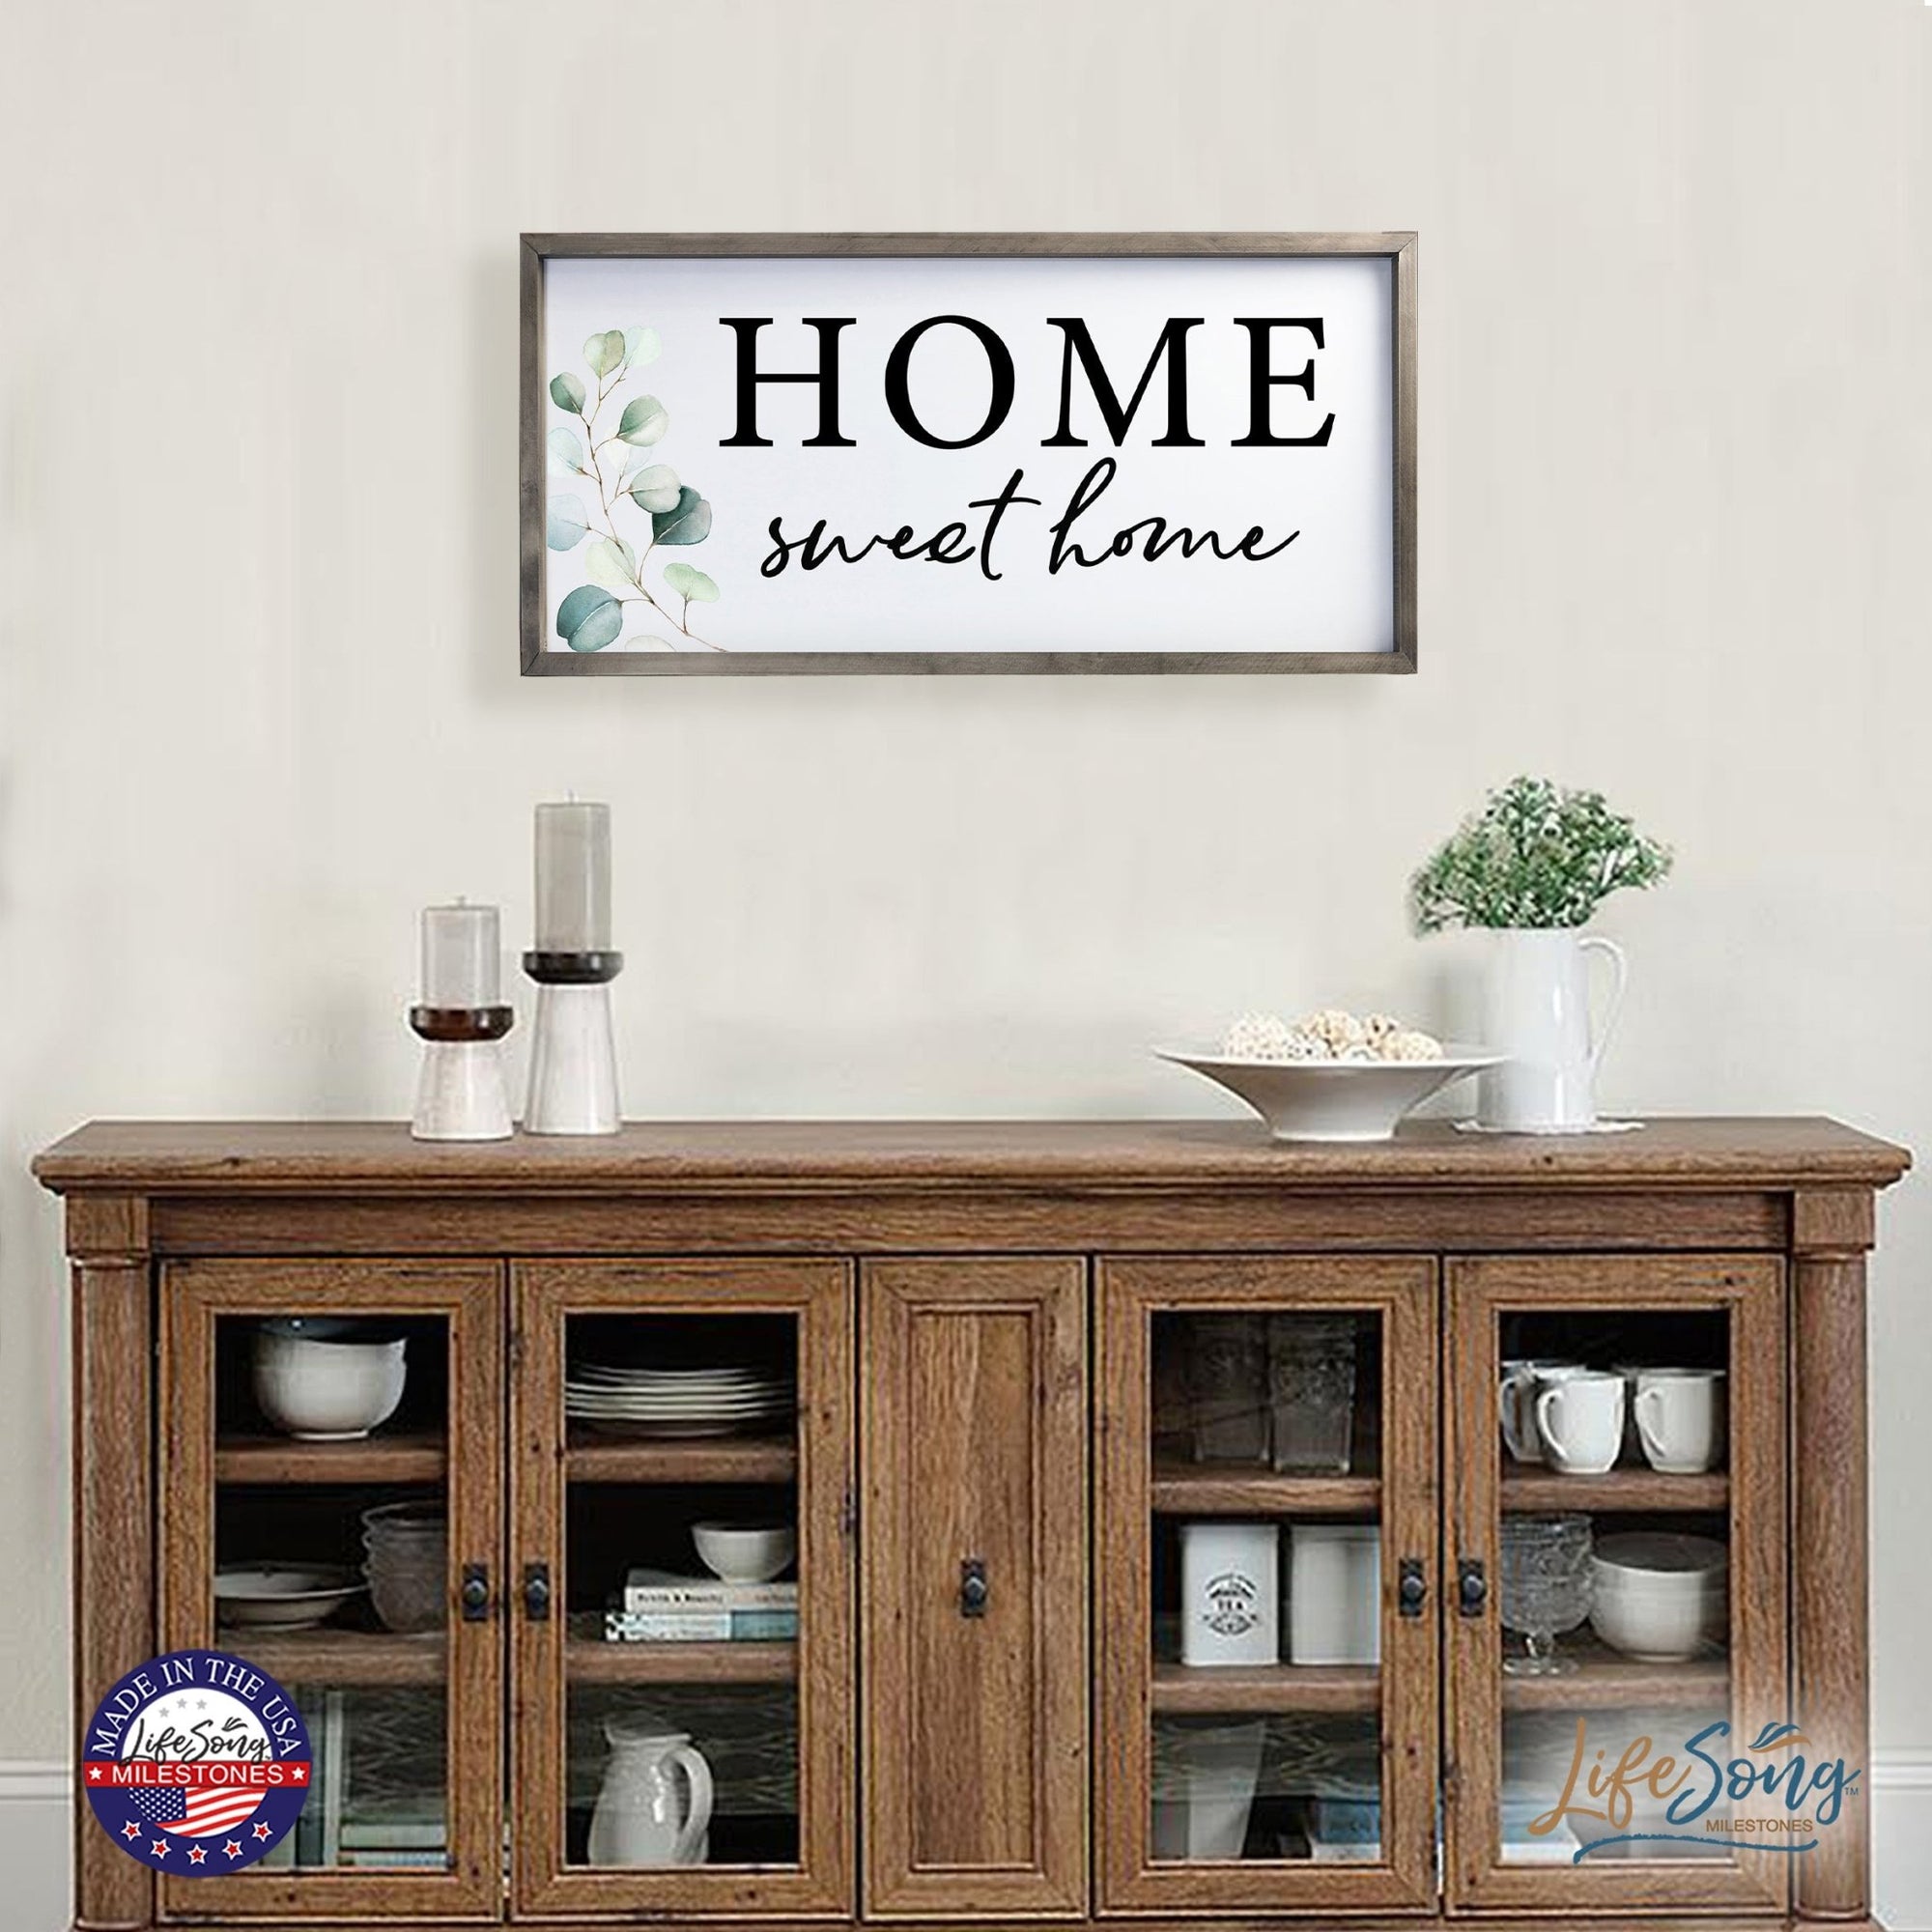 Large Family Wall Decor Quote Sign For Home 18 x 36 - Home Sweet Home - LifeSong Milestones